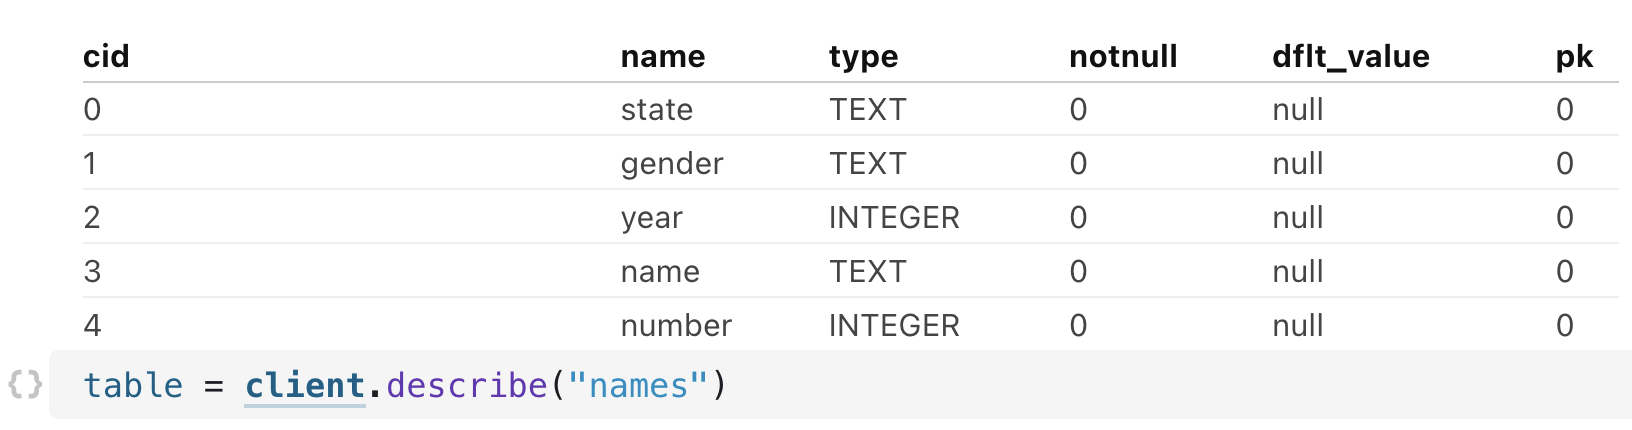 Screenshot showing code 'table = client.describe('names')', with an output table shown above with table 'names' information from the database 'client'.